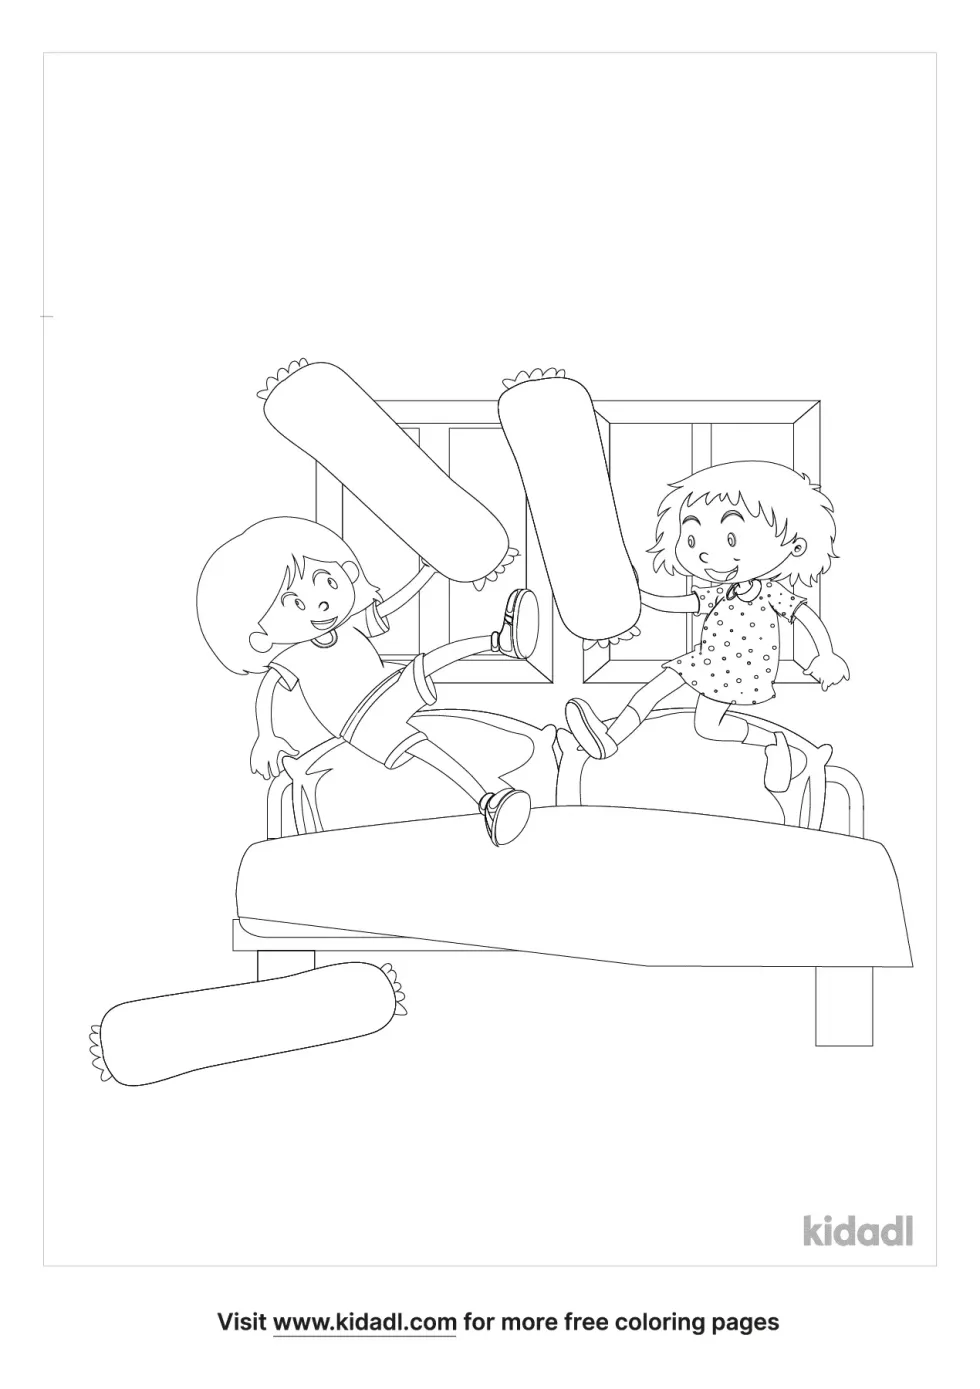 Pillow Fight Coloring Page